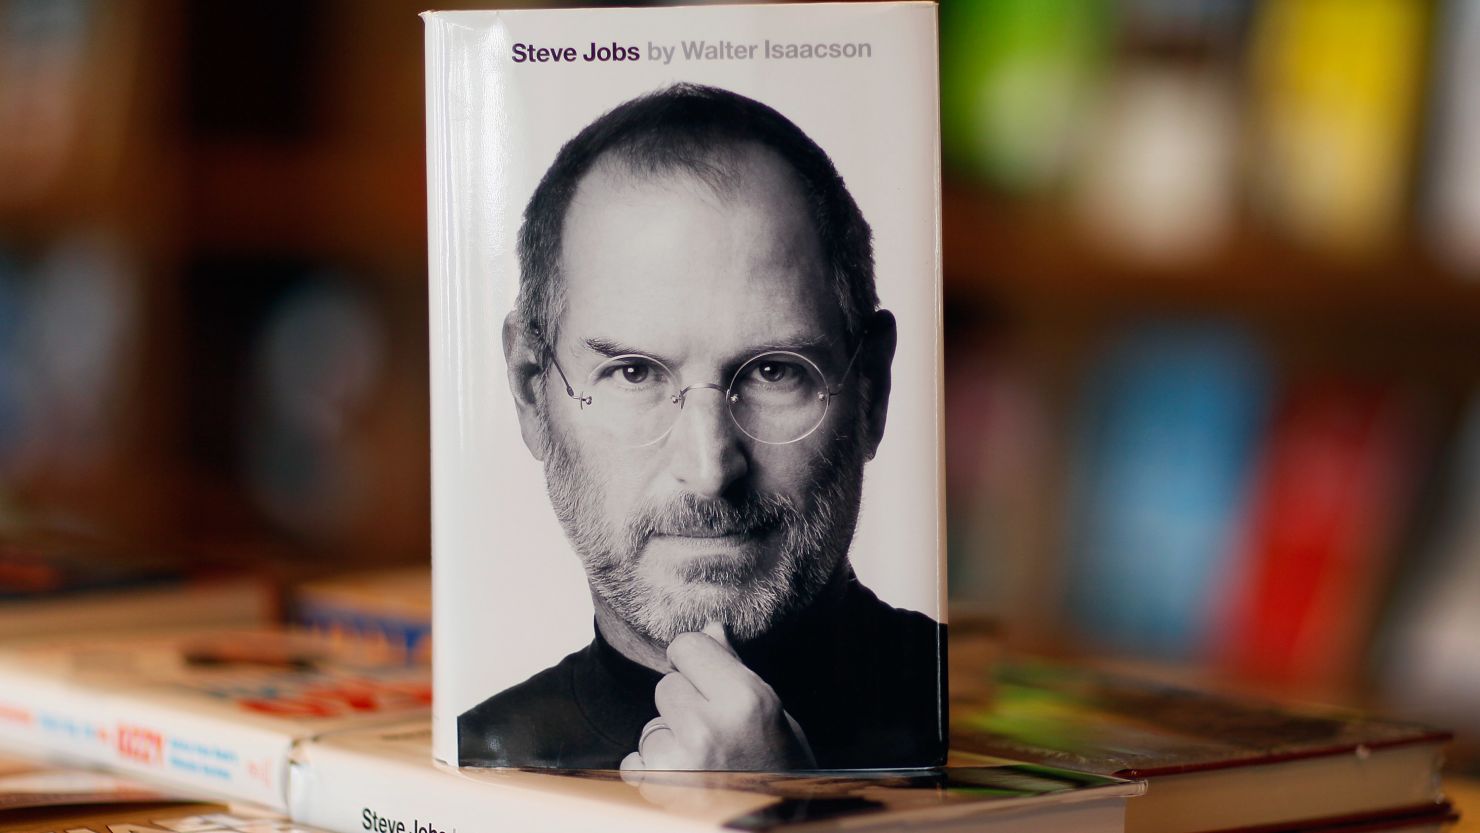 "Steve Jobs," an eagerly awaited biography of the late Apple-co-founder, went on sale Monday.